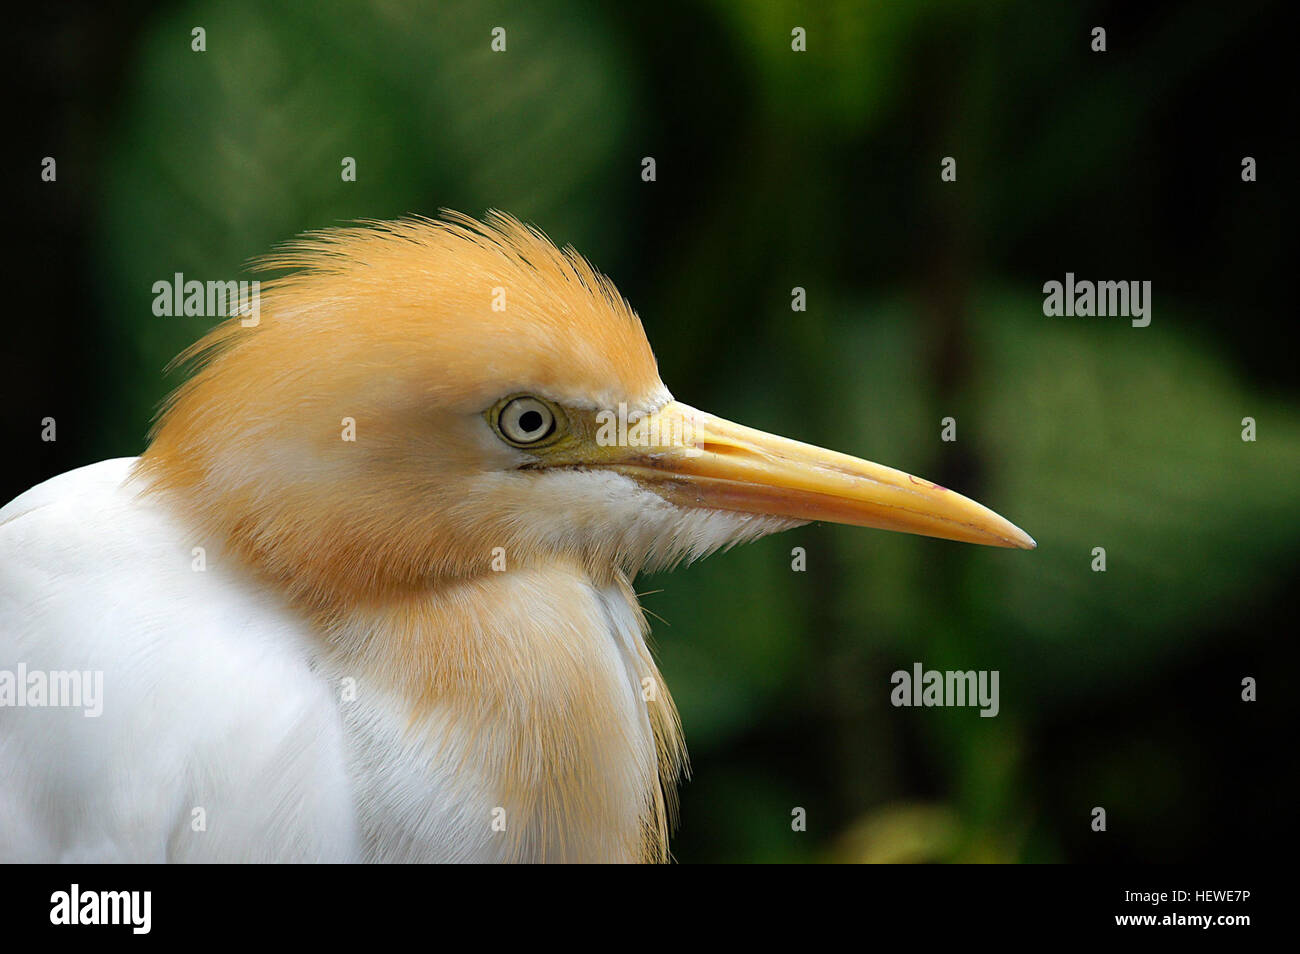 The Cattle Egret (Bubulcus ibis) is a cosmopolitan species of heron (family Ardeidae) found in the tropics, subtropics and warm temperate zones. It is the only member of the monotypic genus Bubulcus, although some authorities regard its two subspecies as full species, the Western Cattle Egret and the Eastern Cattle Egret. Despite the similarities in plumage to the egrets of the genus Egretta, it is more closely related to the herons of Ardea. Originally native to parts of Asia, Africa and Europe, it has undergone a rapid expansion in its distribution and successfully colonised much of the rest Stock Photo